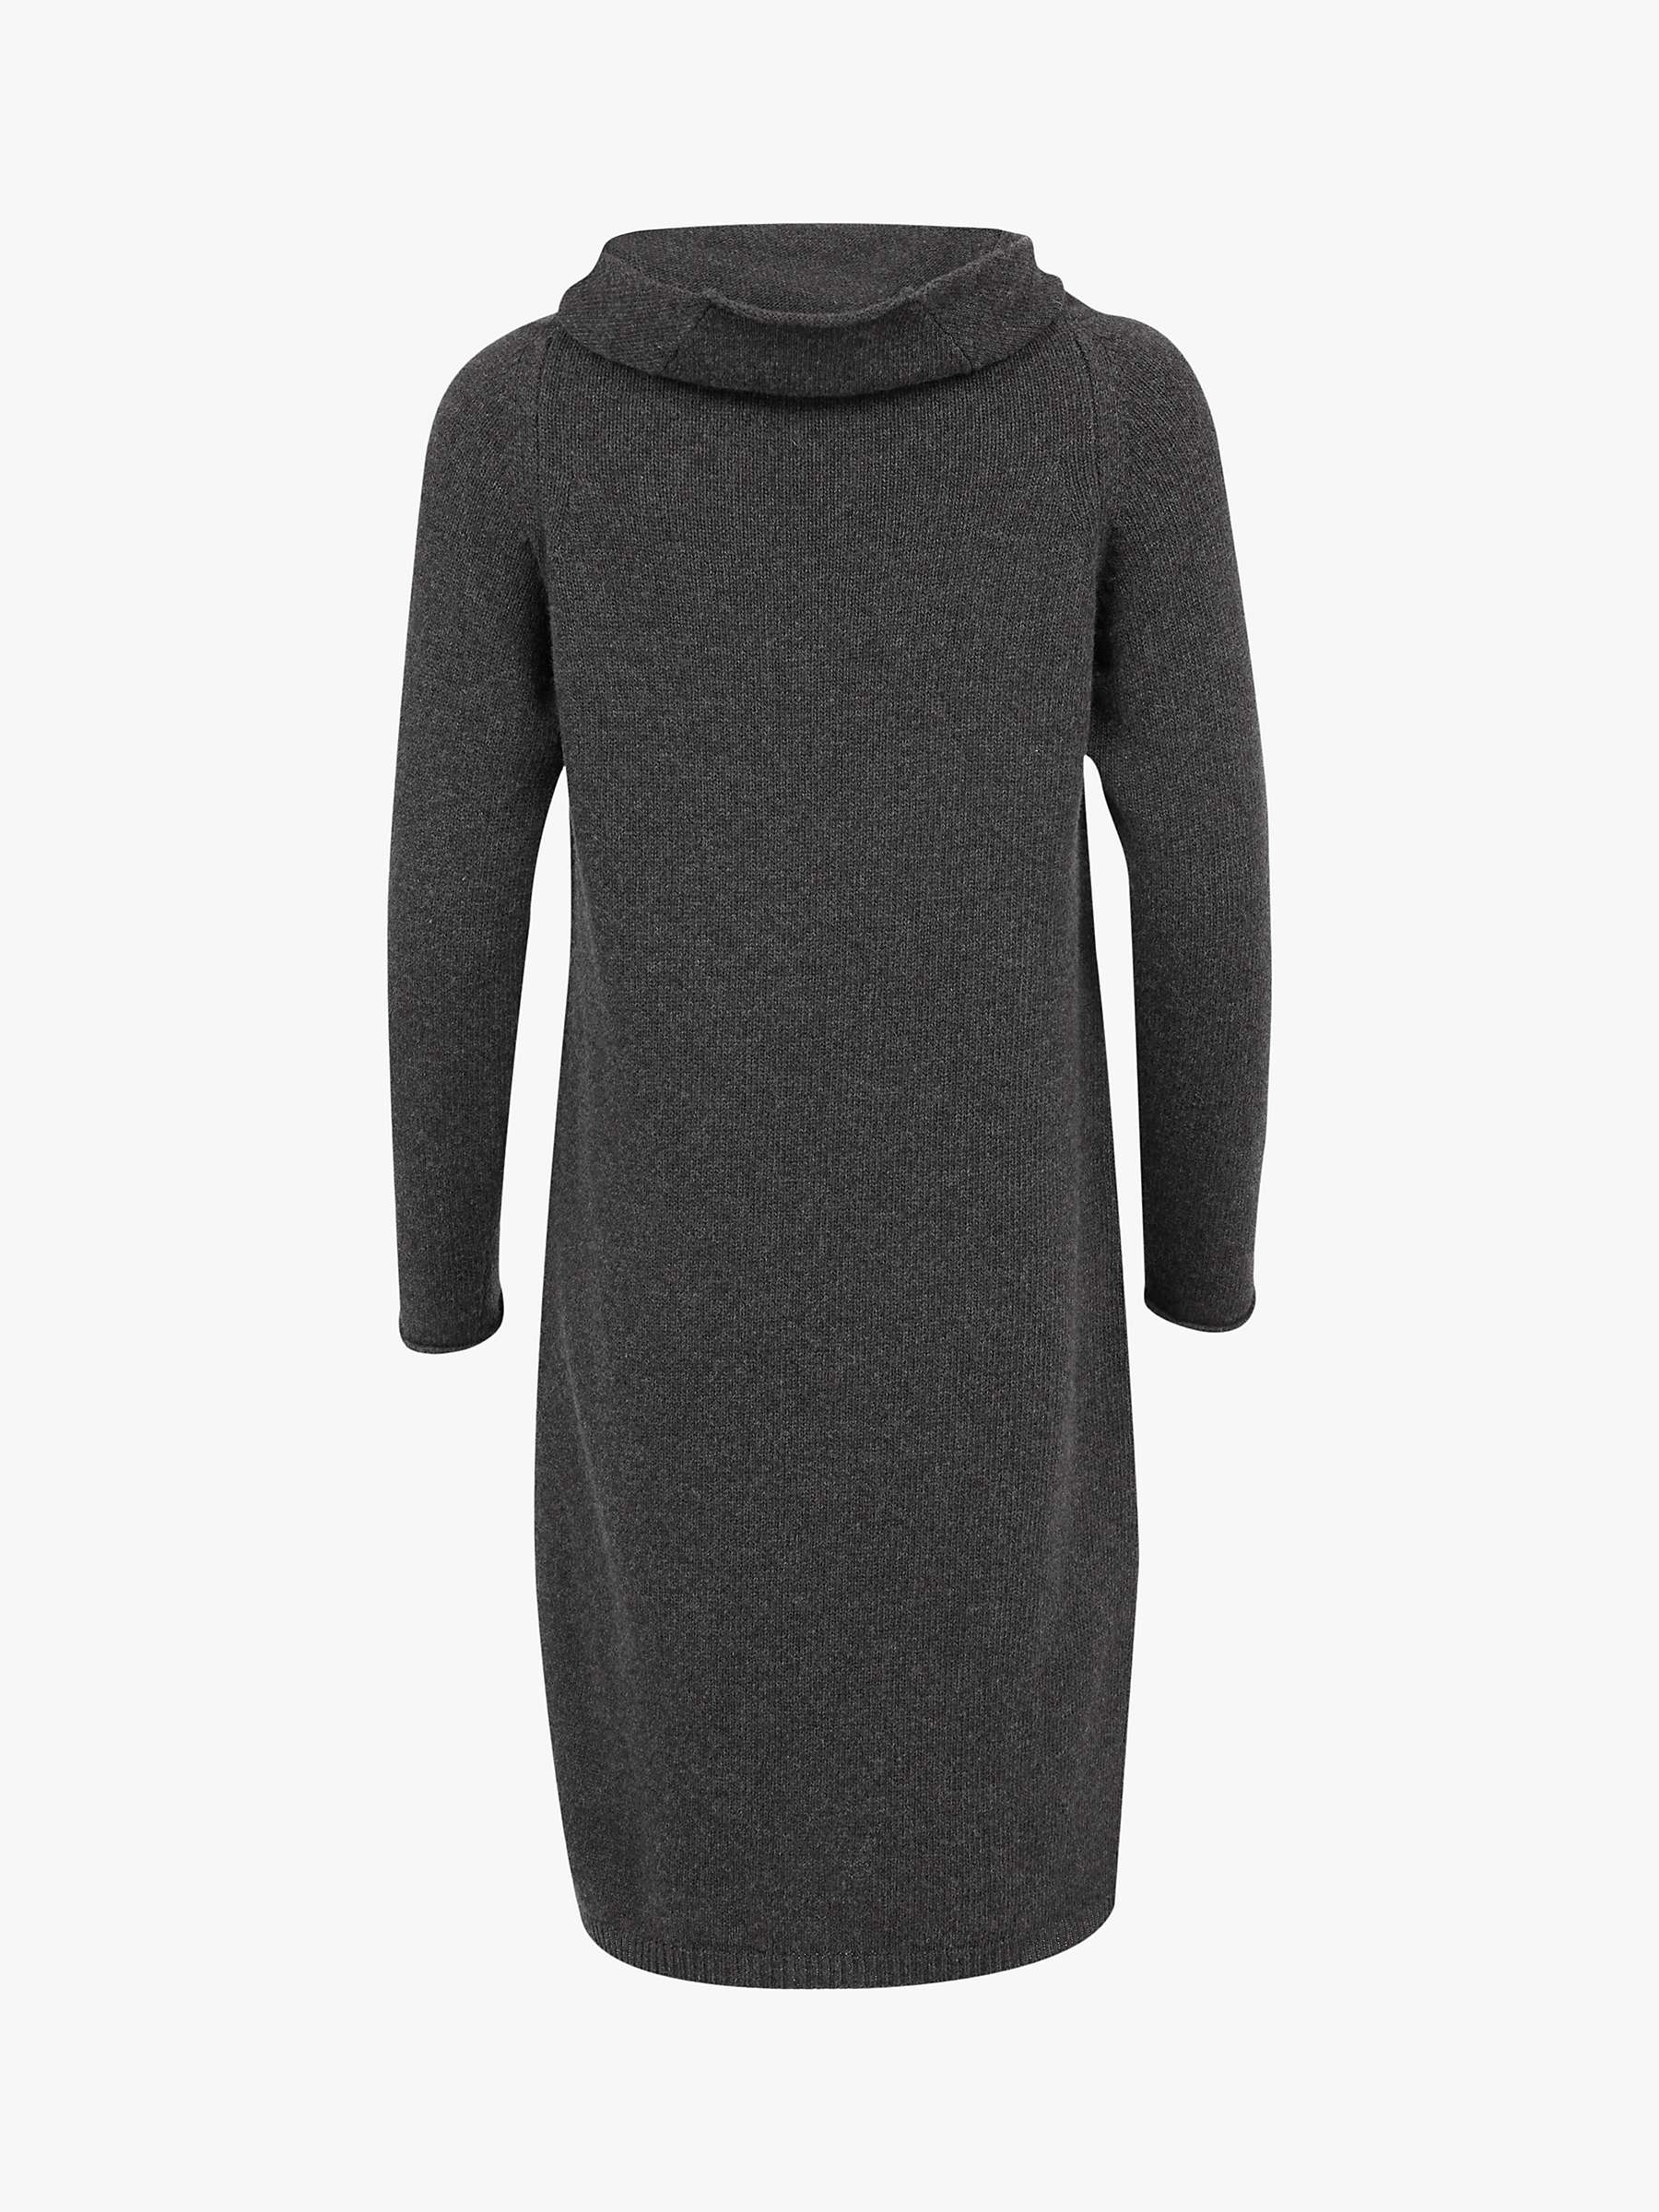 Buy Celtic & Co. Cowl Neck Lambswool Jumper Dress, Charcoal Online at johnlewis.com